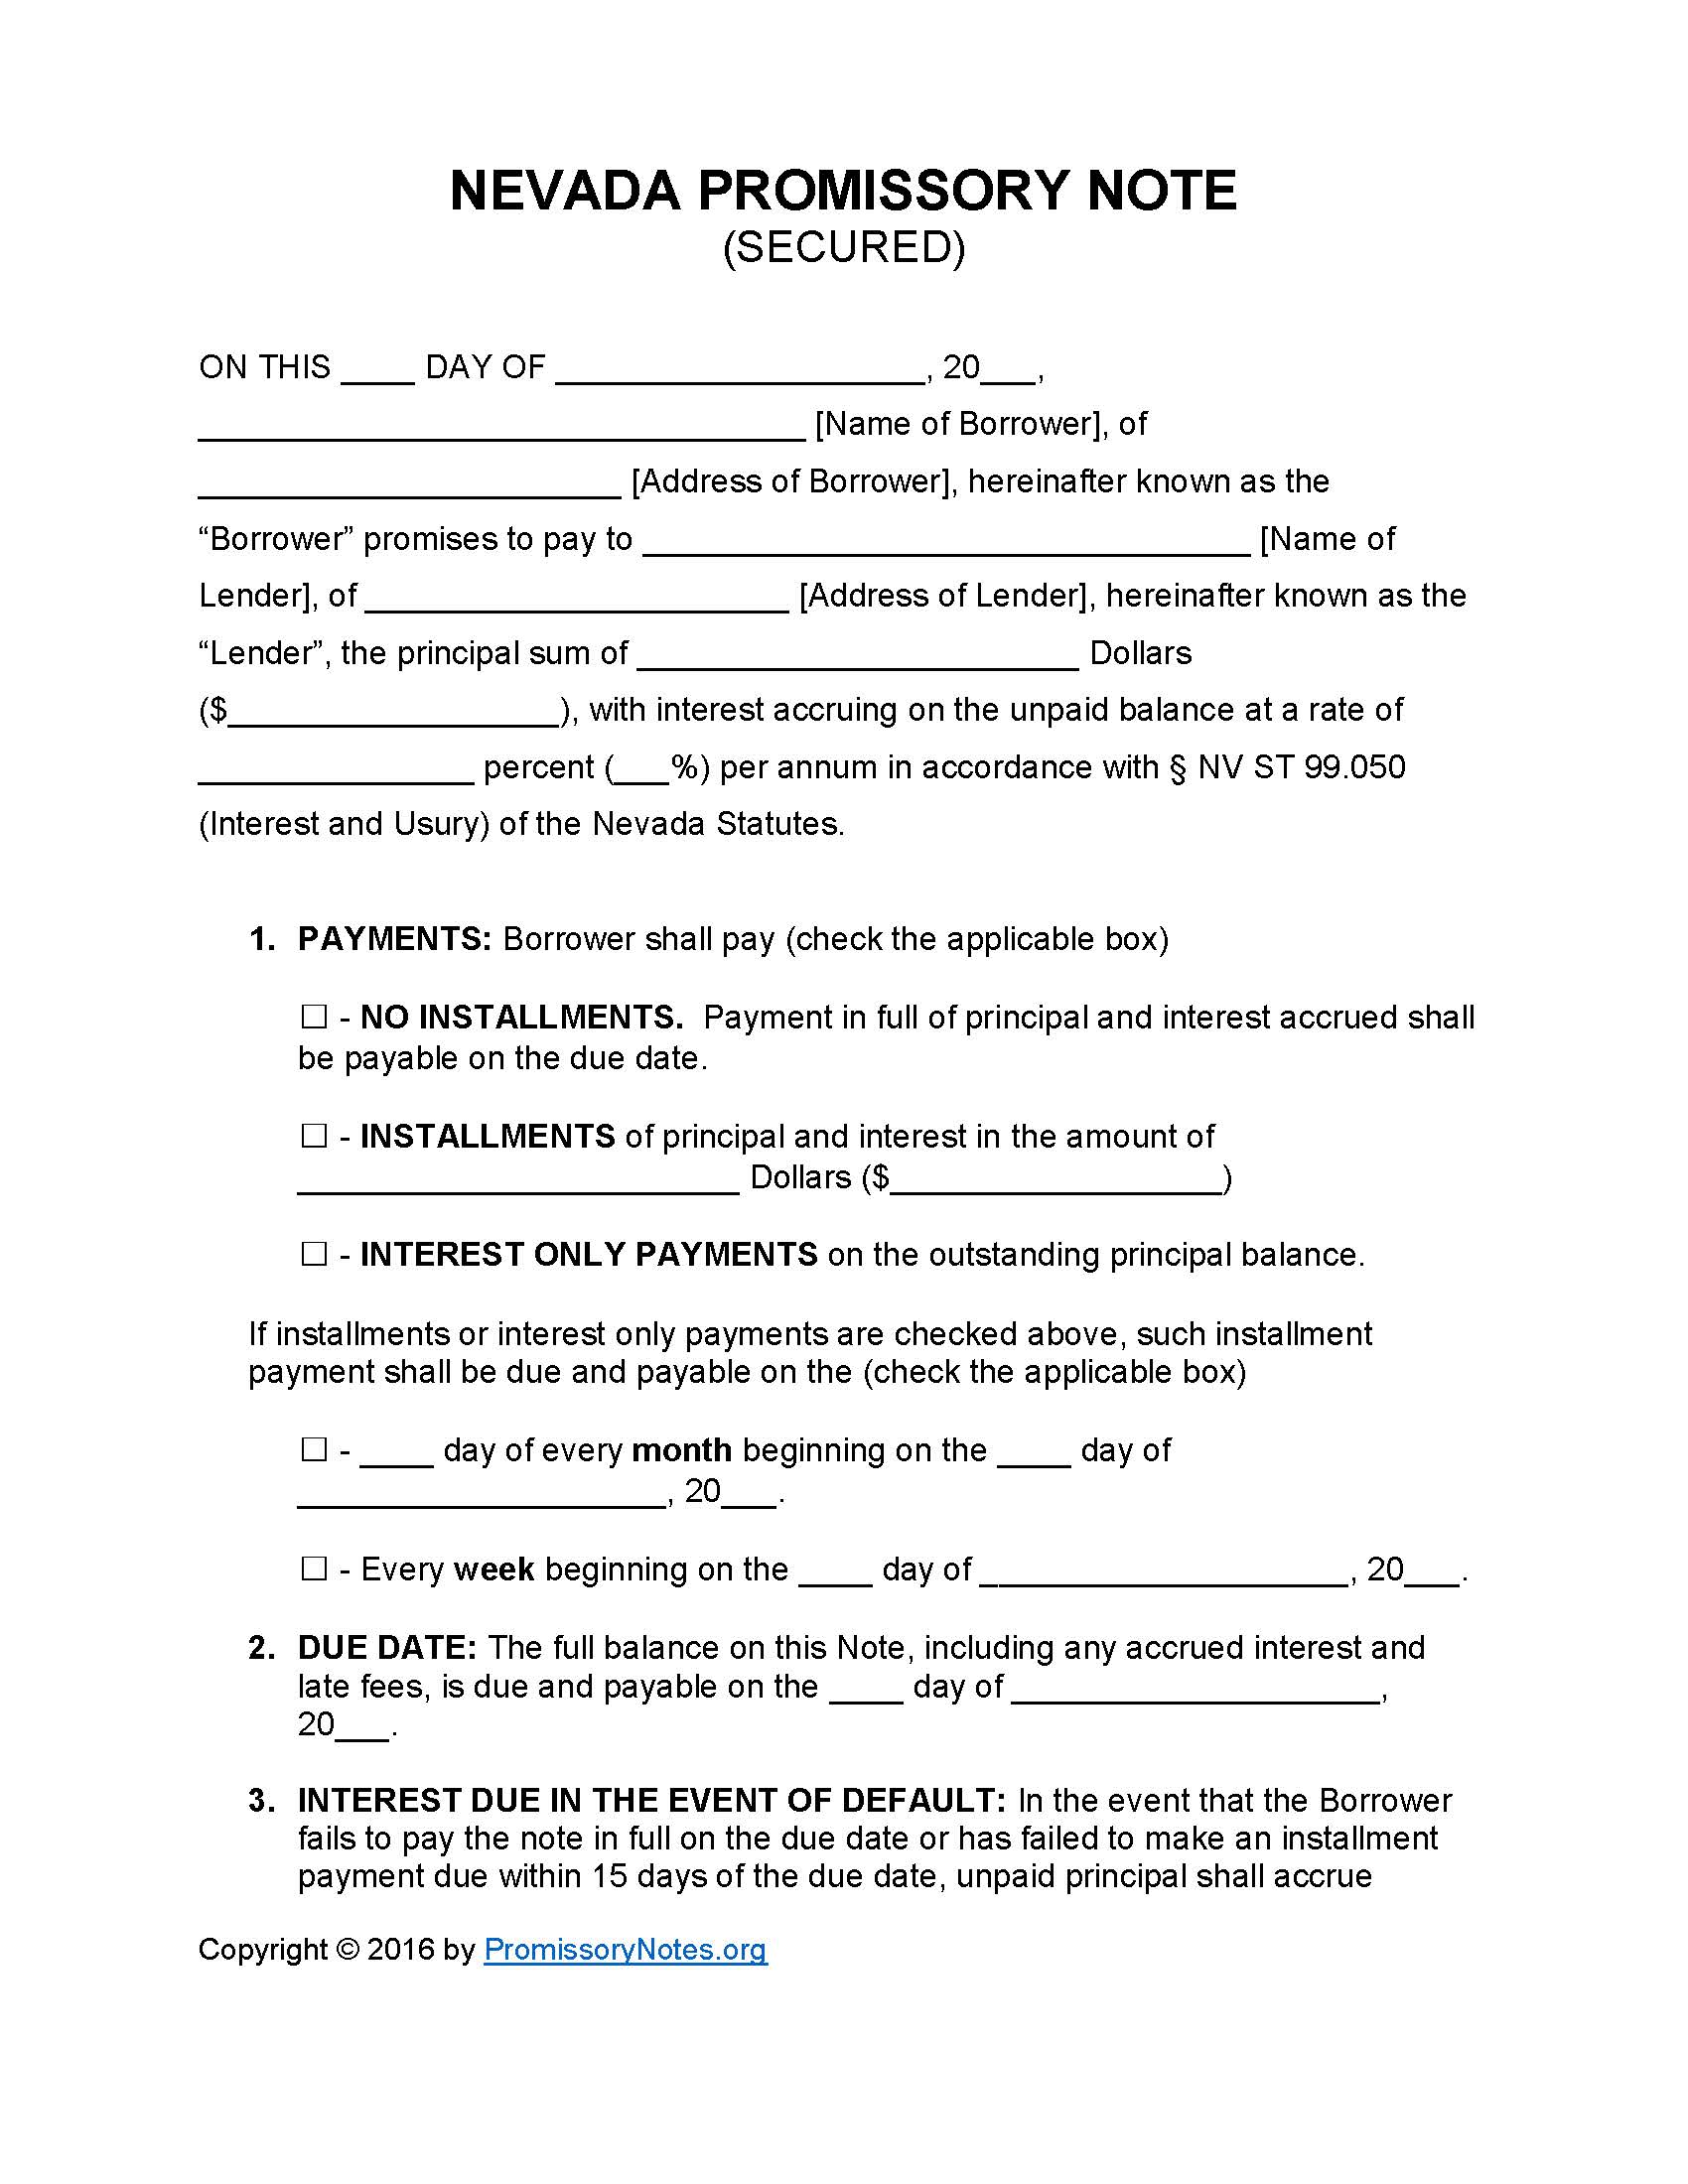 nevada-secured-promissory-note-form